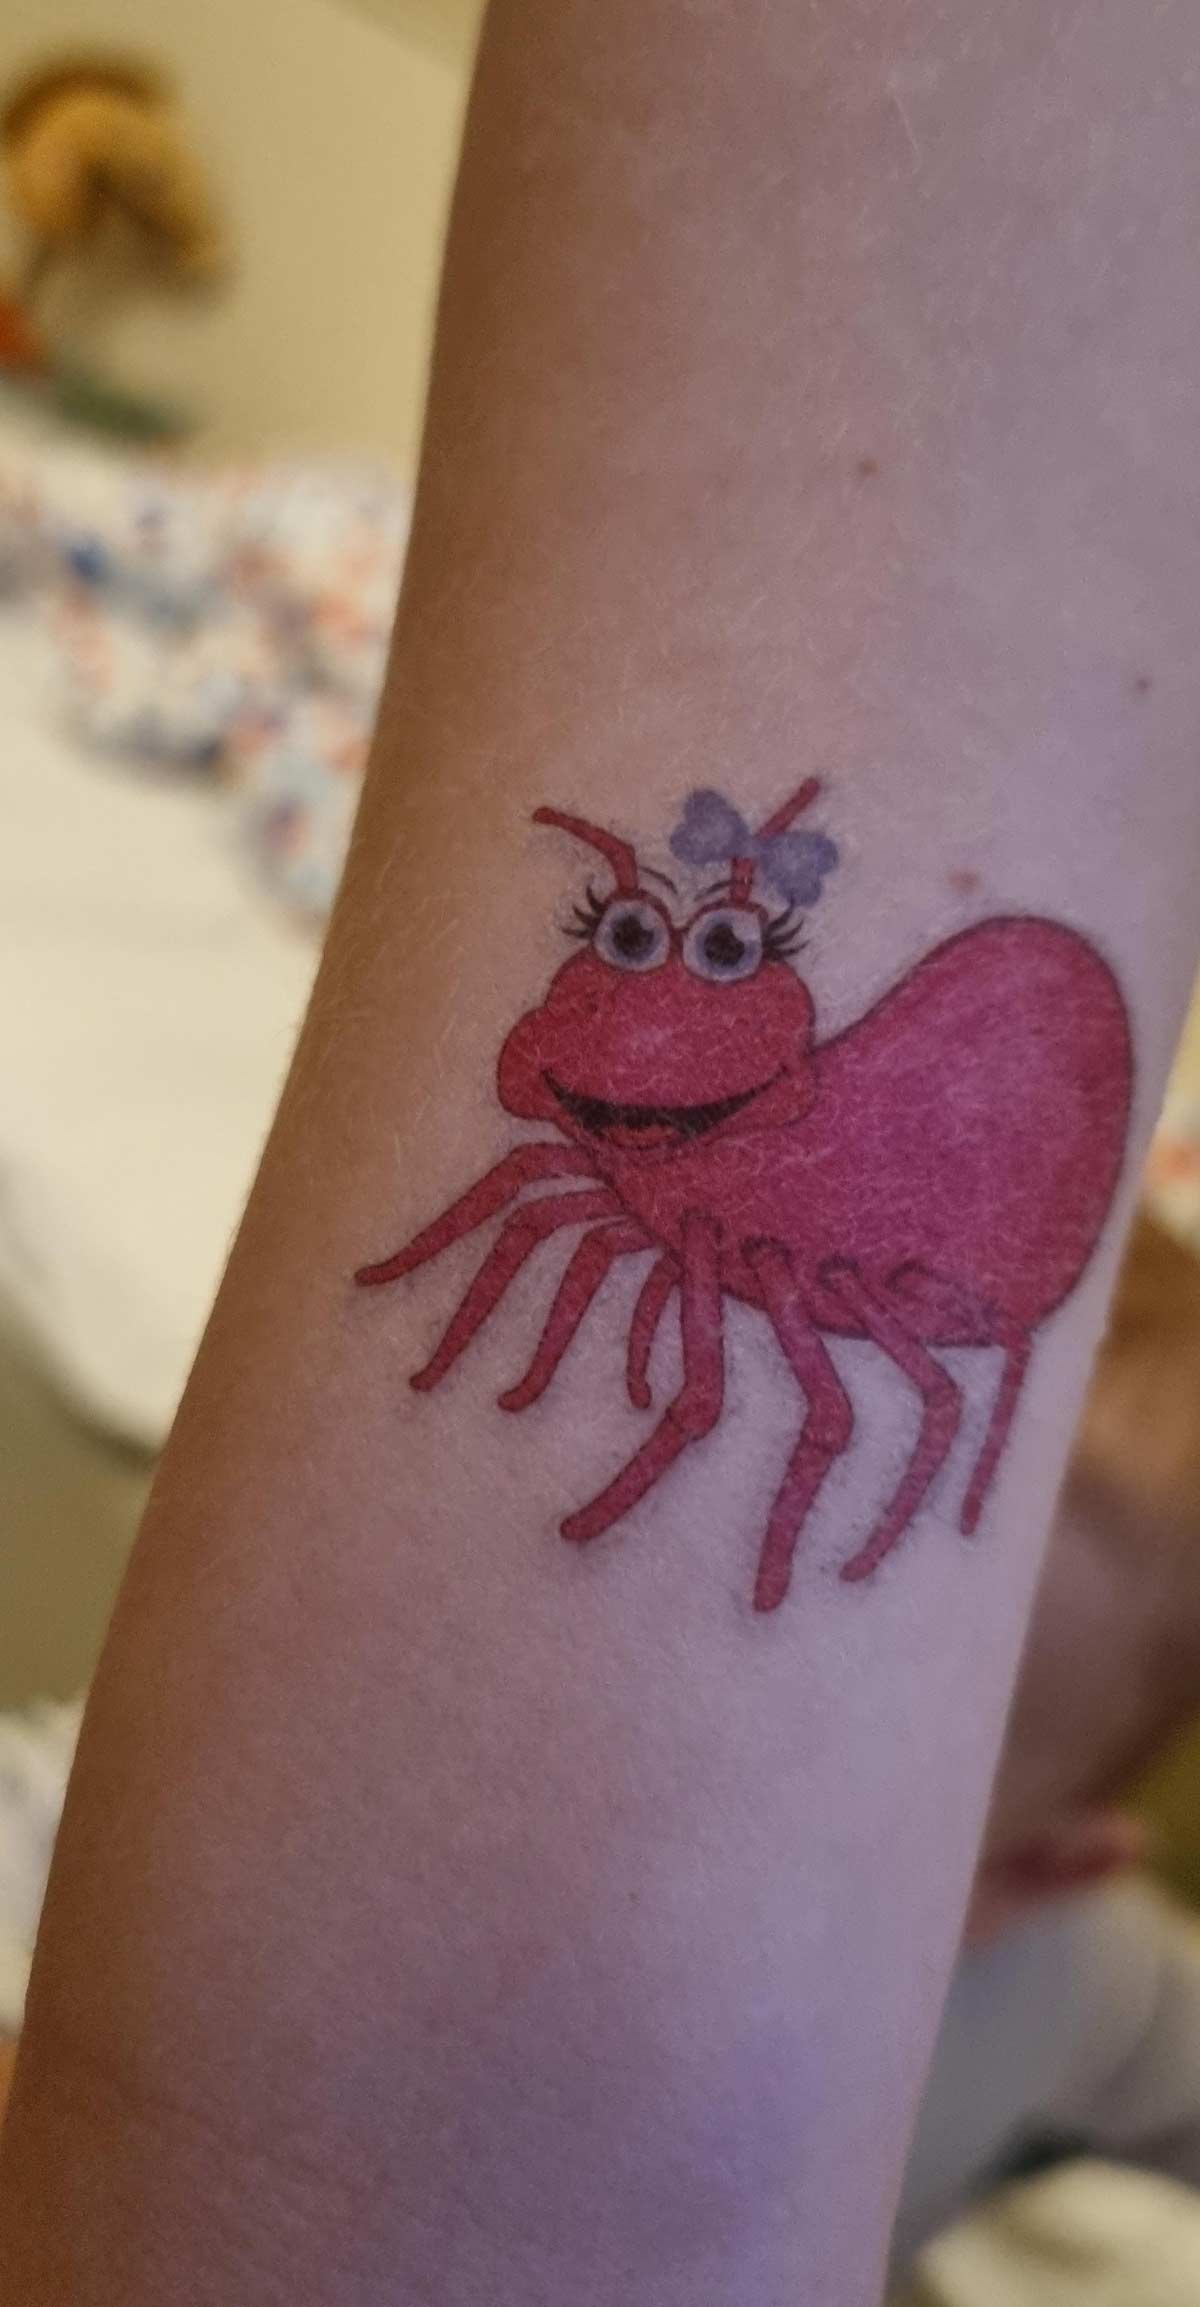 Out of hundreds of fake tattoos my daughter could have chosen after the dentist visit, she chose a tick